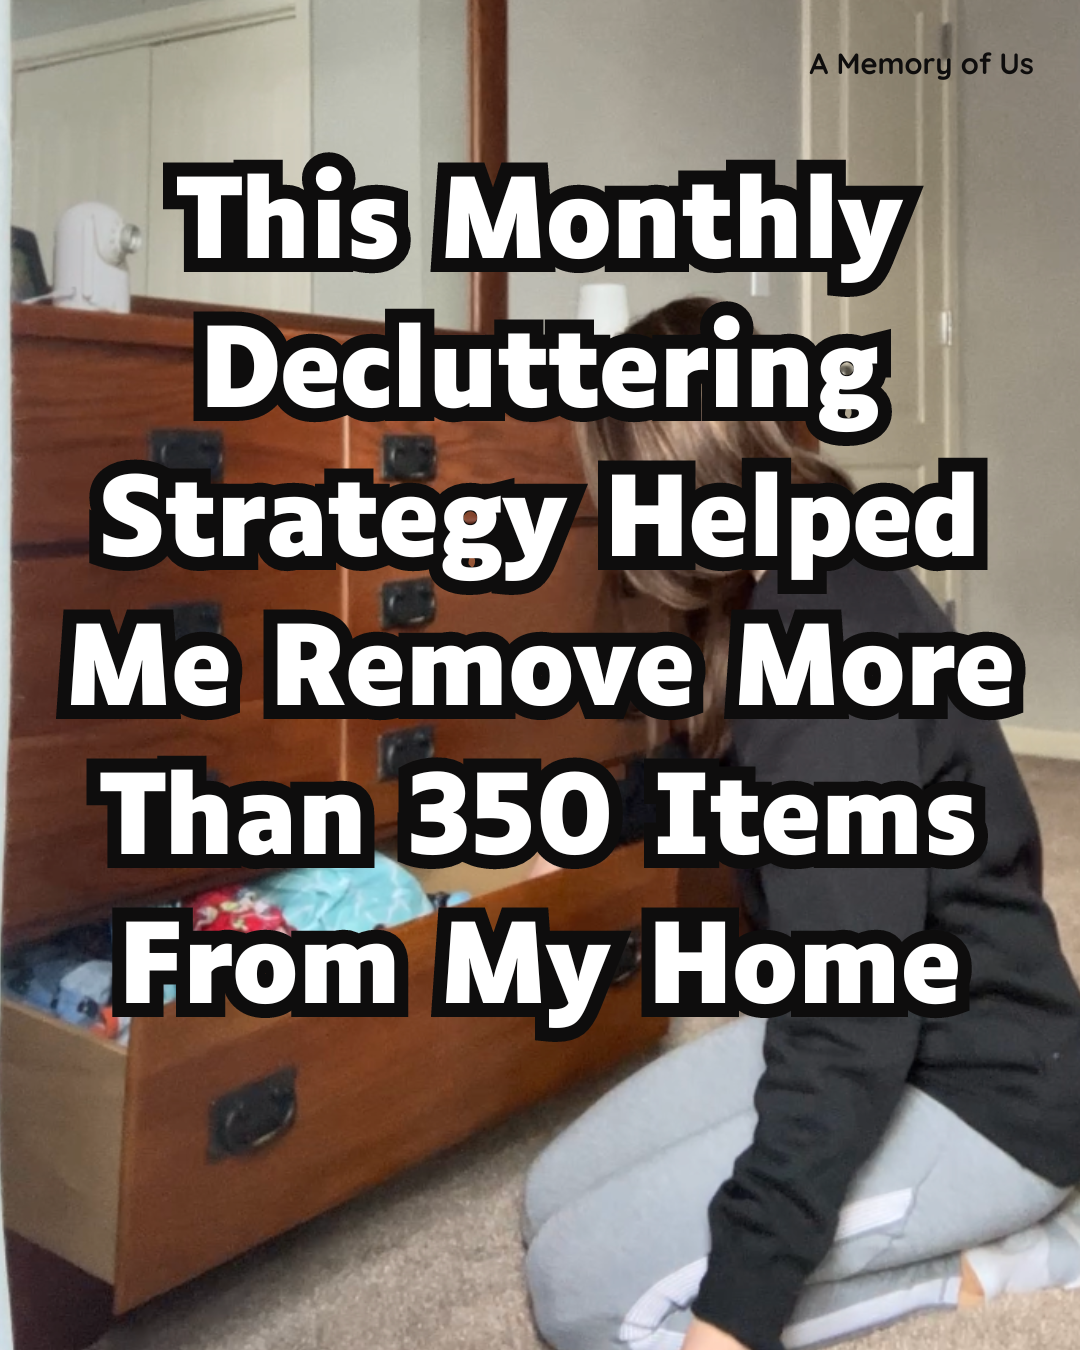 How to Declutter Your House | Best Monthly Decluttering Strategy | Decluttering Challenge | Declutter Your Home | Decluttering Calendar | Monthly Declutter Challenge | A Memory of Us | Minimalism